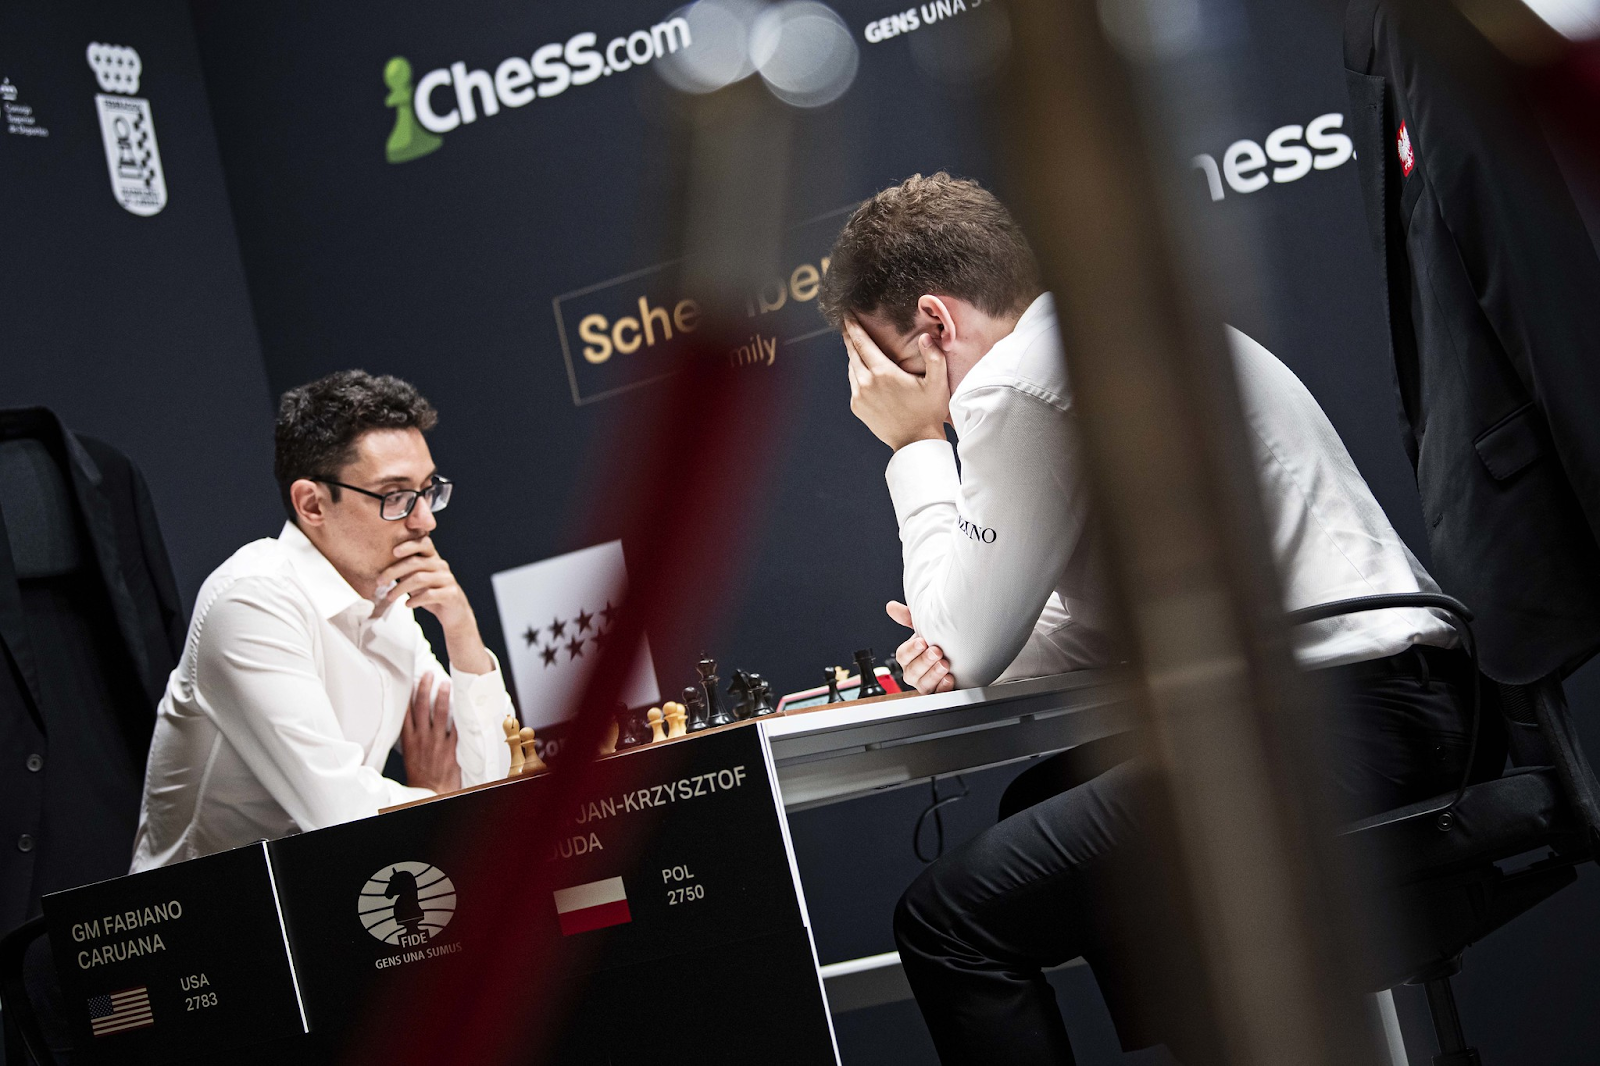 R7 of the FIDE Candidates Chess 2022 opened with four ceremonial moves –  Chessdom